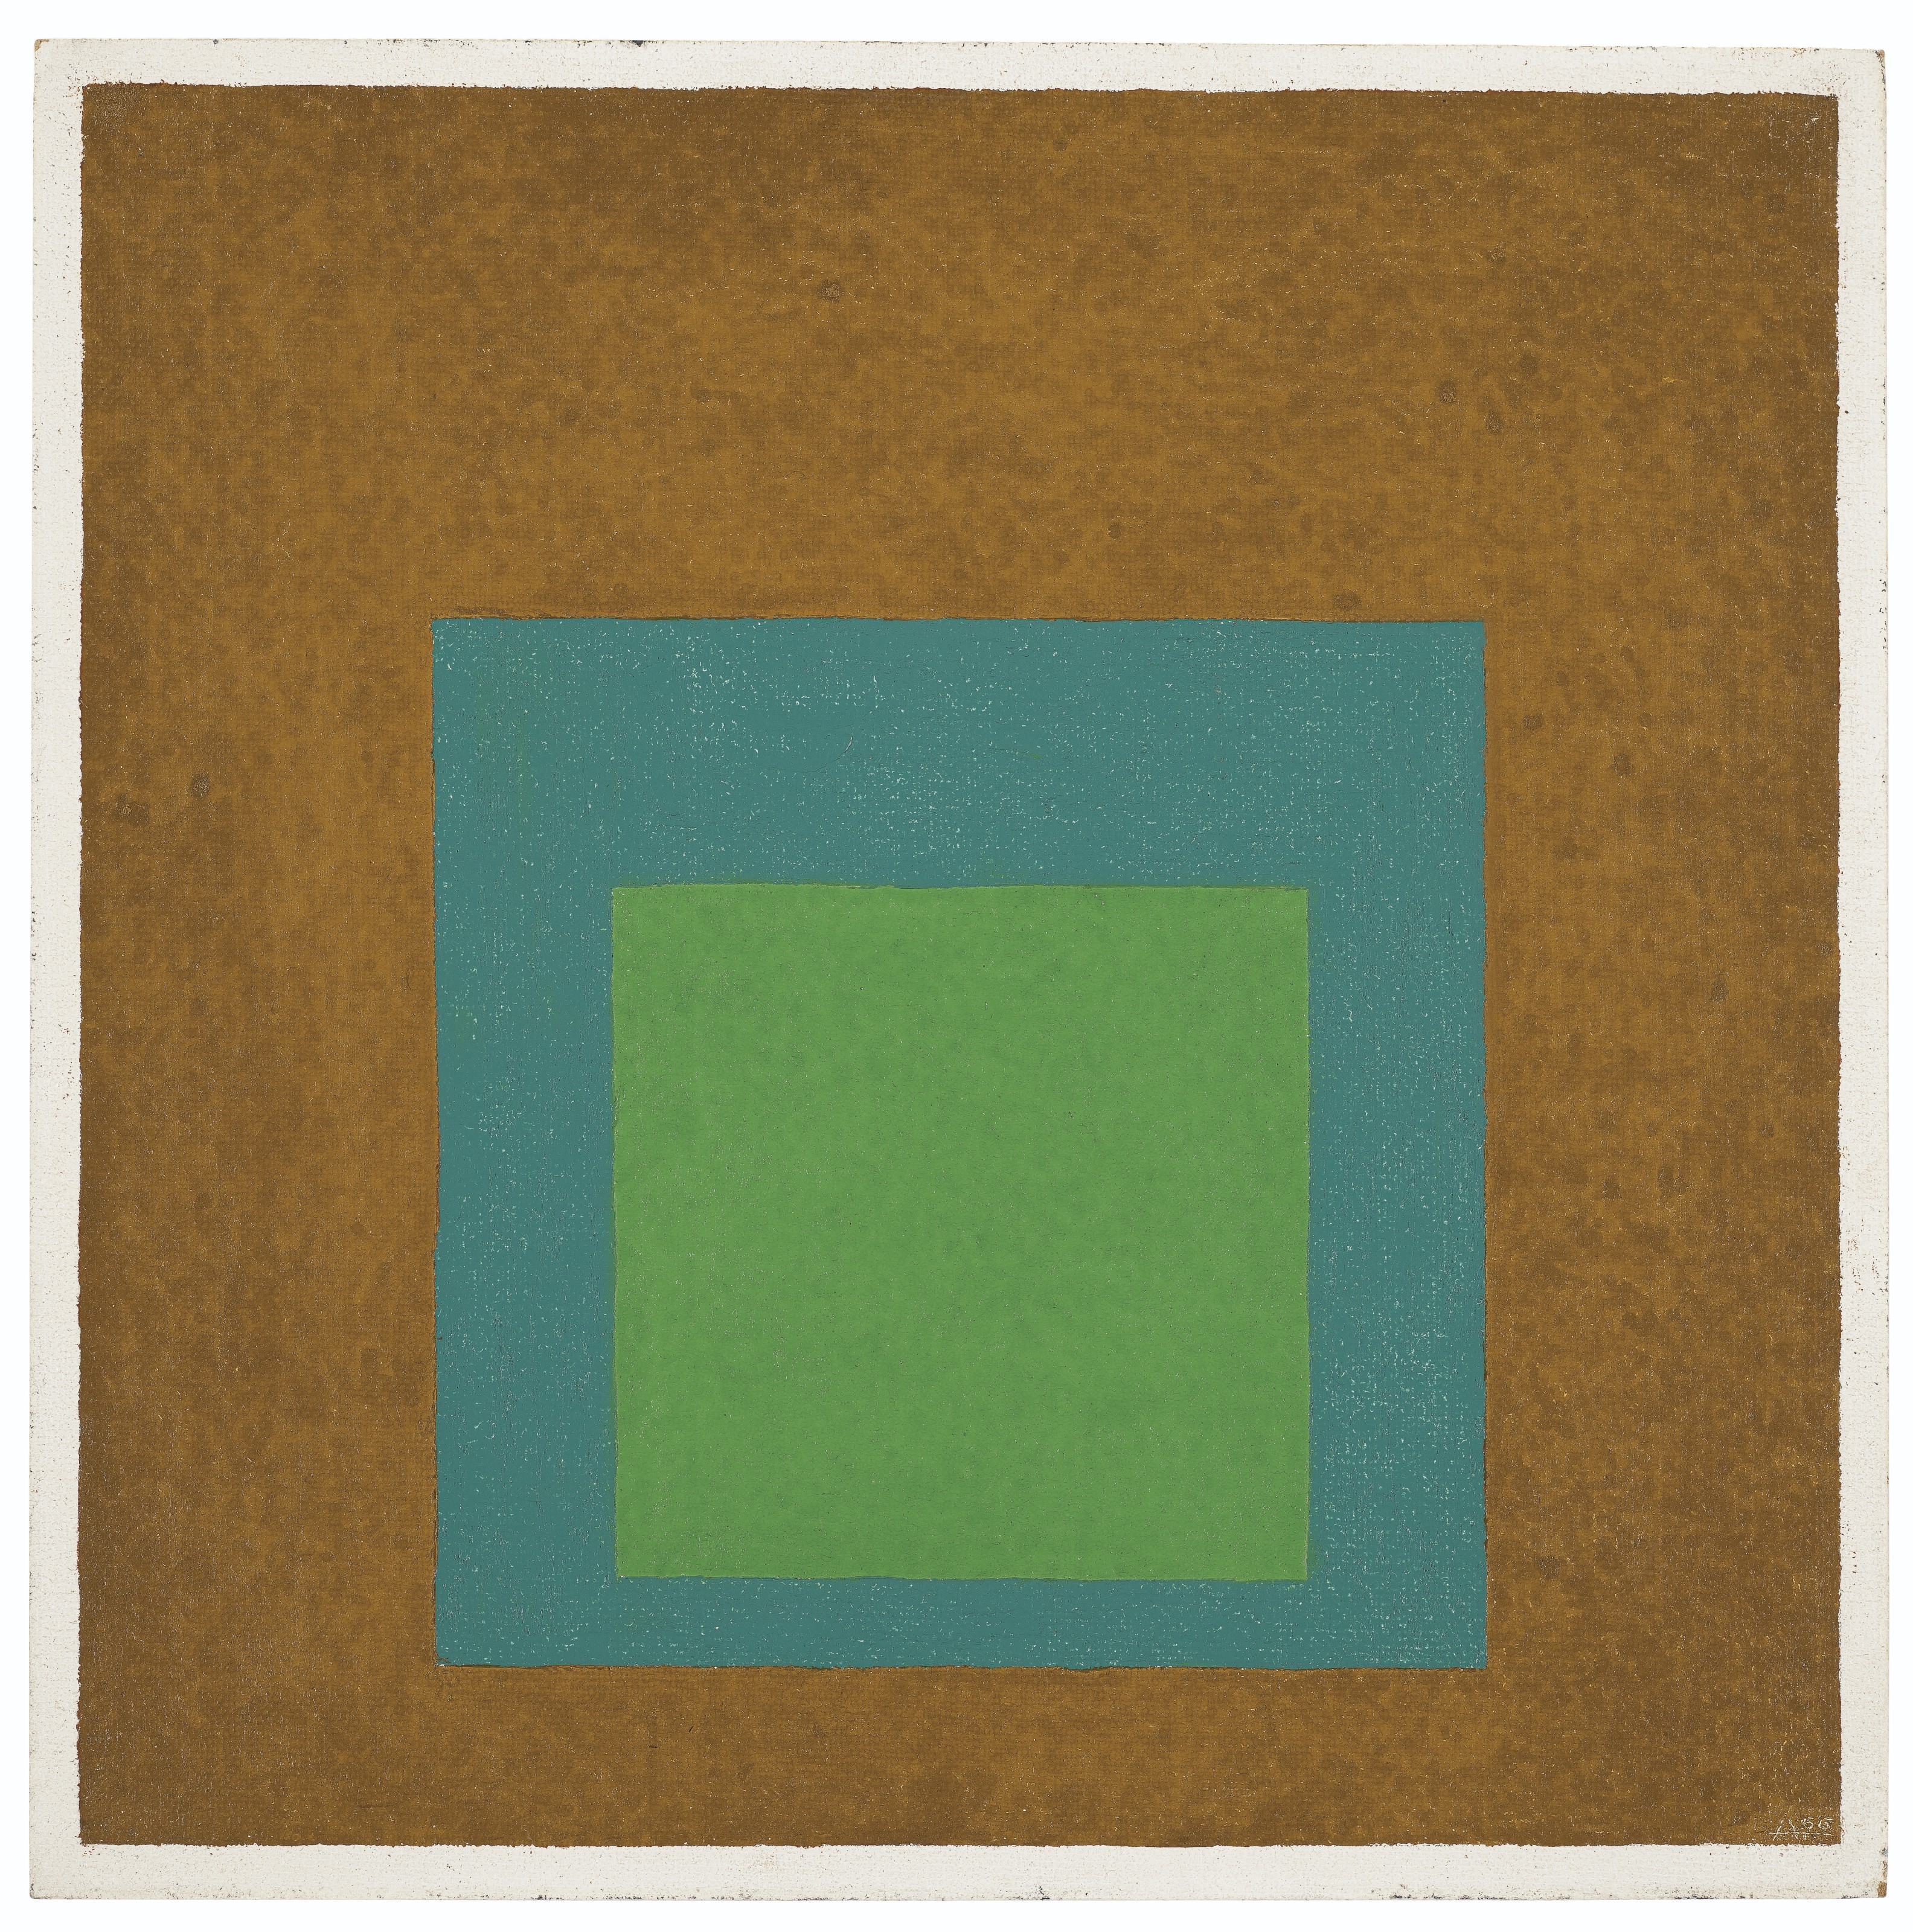 Artwork by Josef Albers, Homage to the Square, Made of oil on Masonite